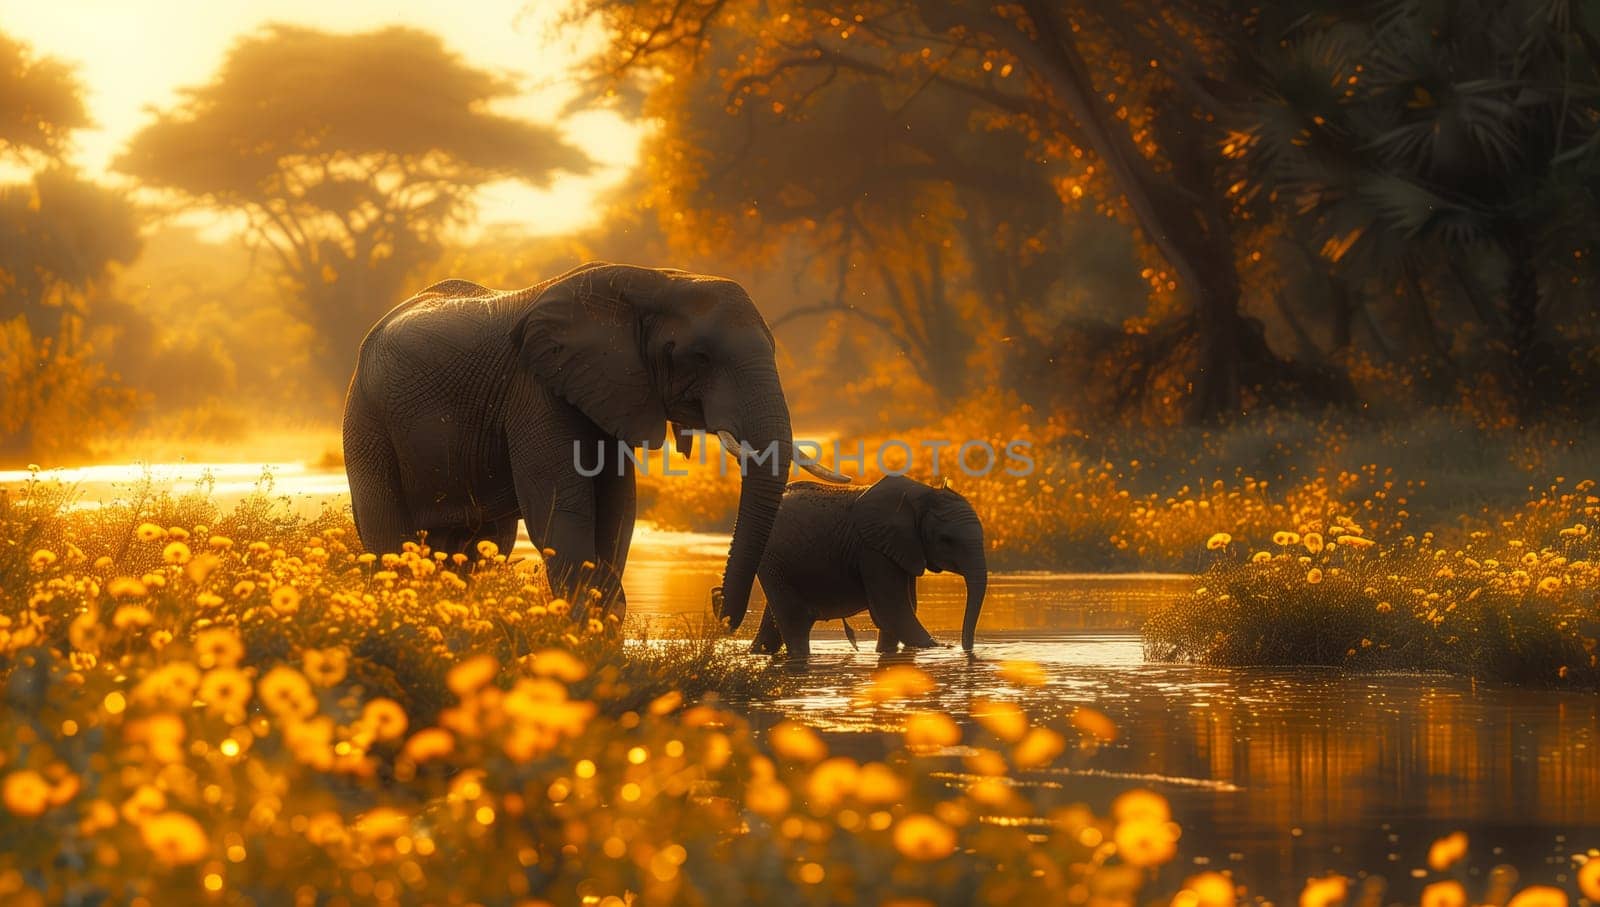 Mother and baby elephants crossing a river in natural landscape by richwolf